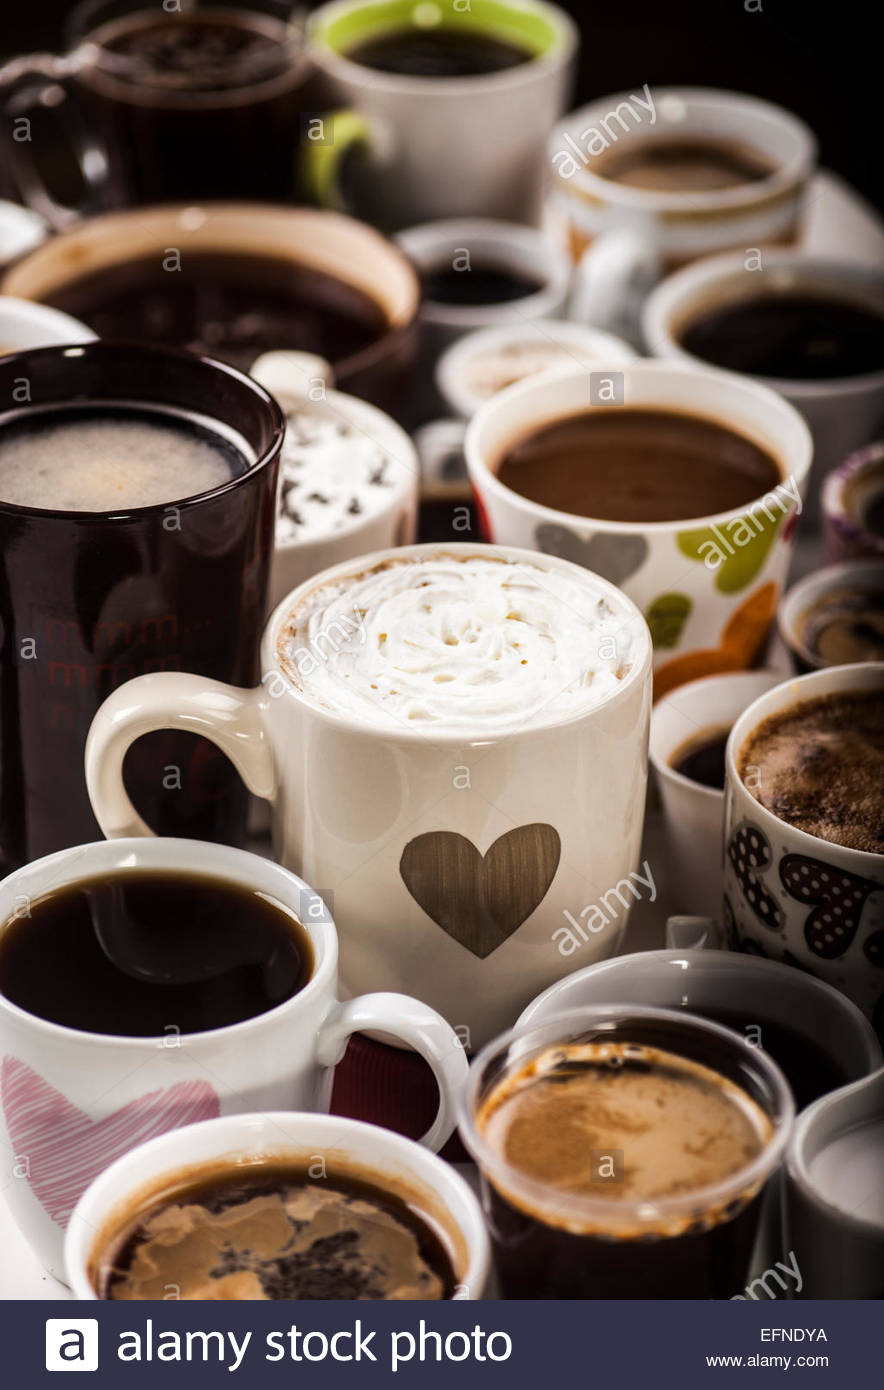 lots-of-coffee-in-different-cups-with-hearts-EFNDYA.jpg